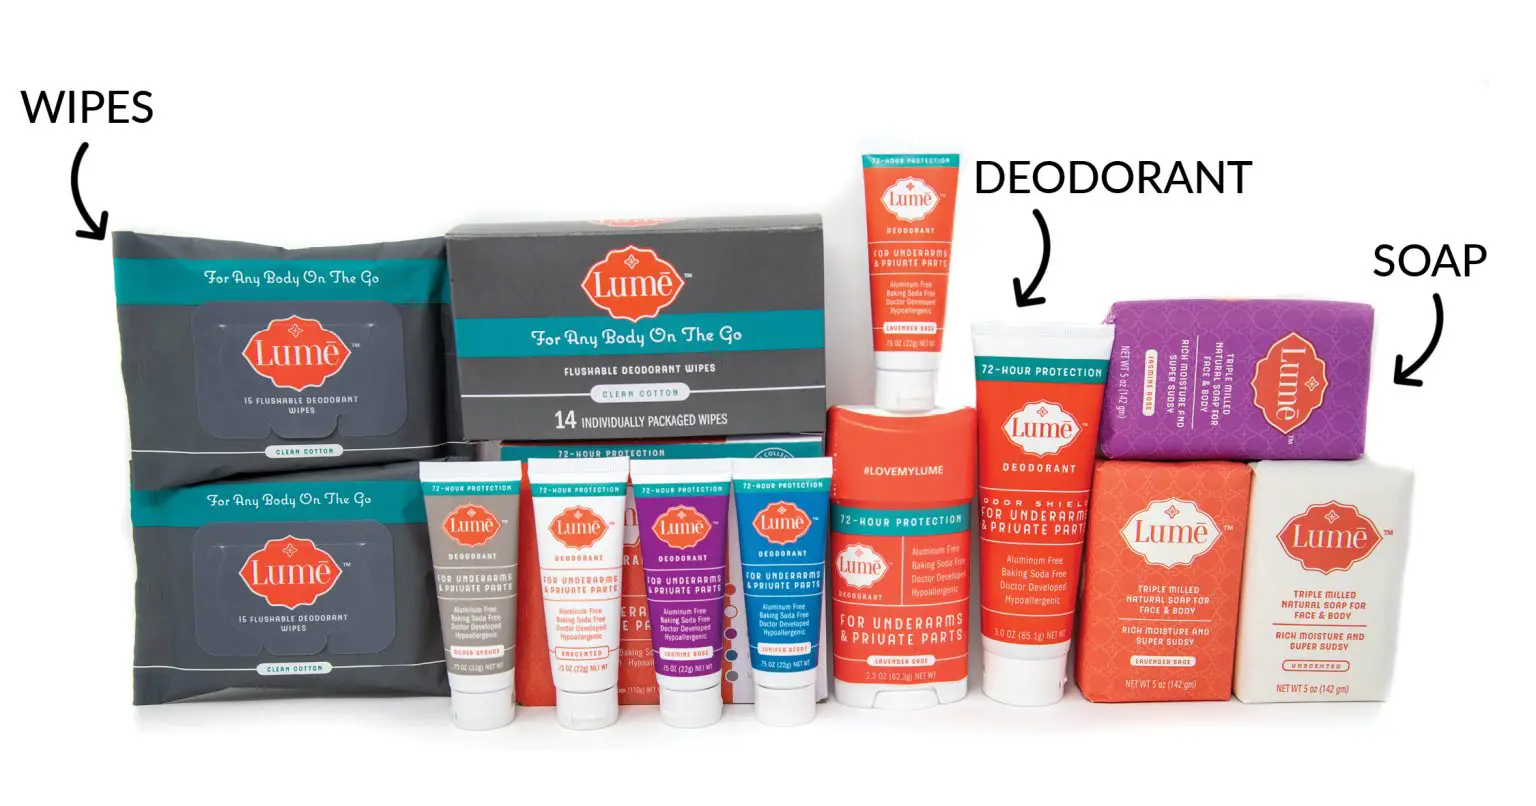 Win A Free Lume Care Package Ends 4/25 Freebies Frenzy